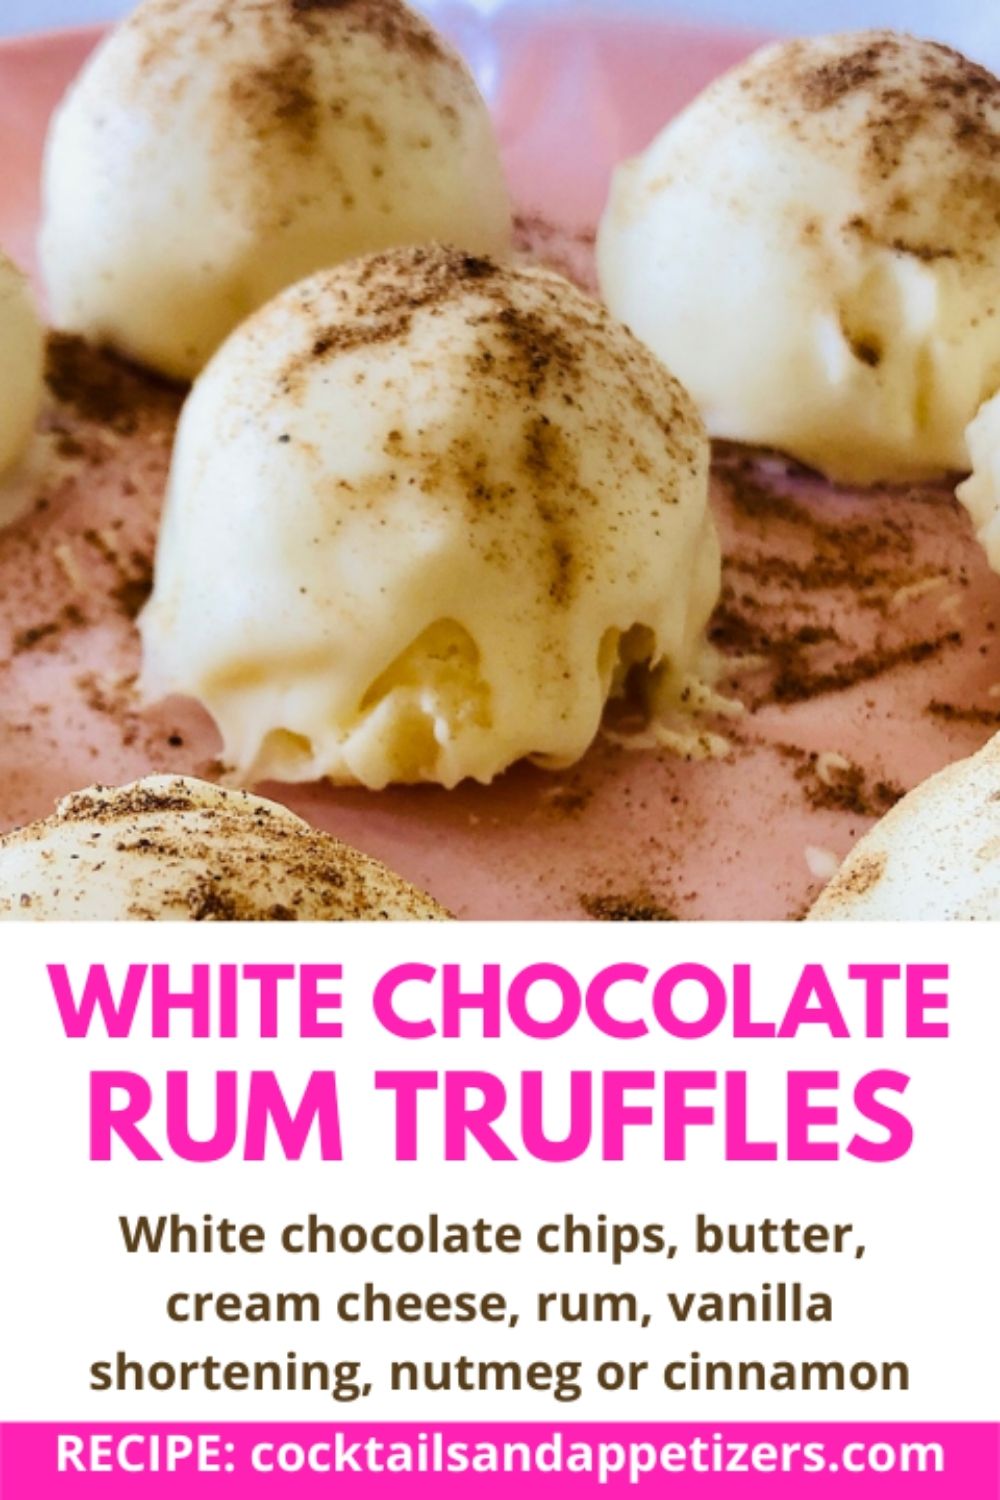 White chocolate rum truffles on a pink plate.